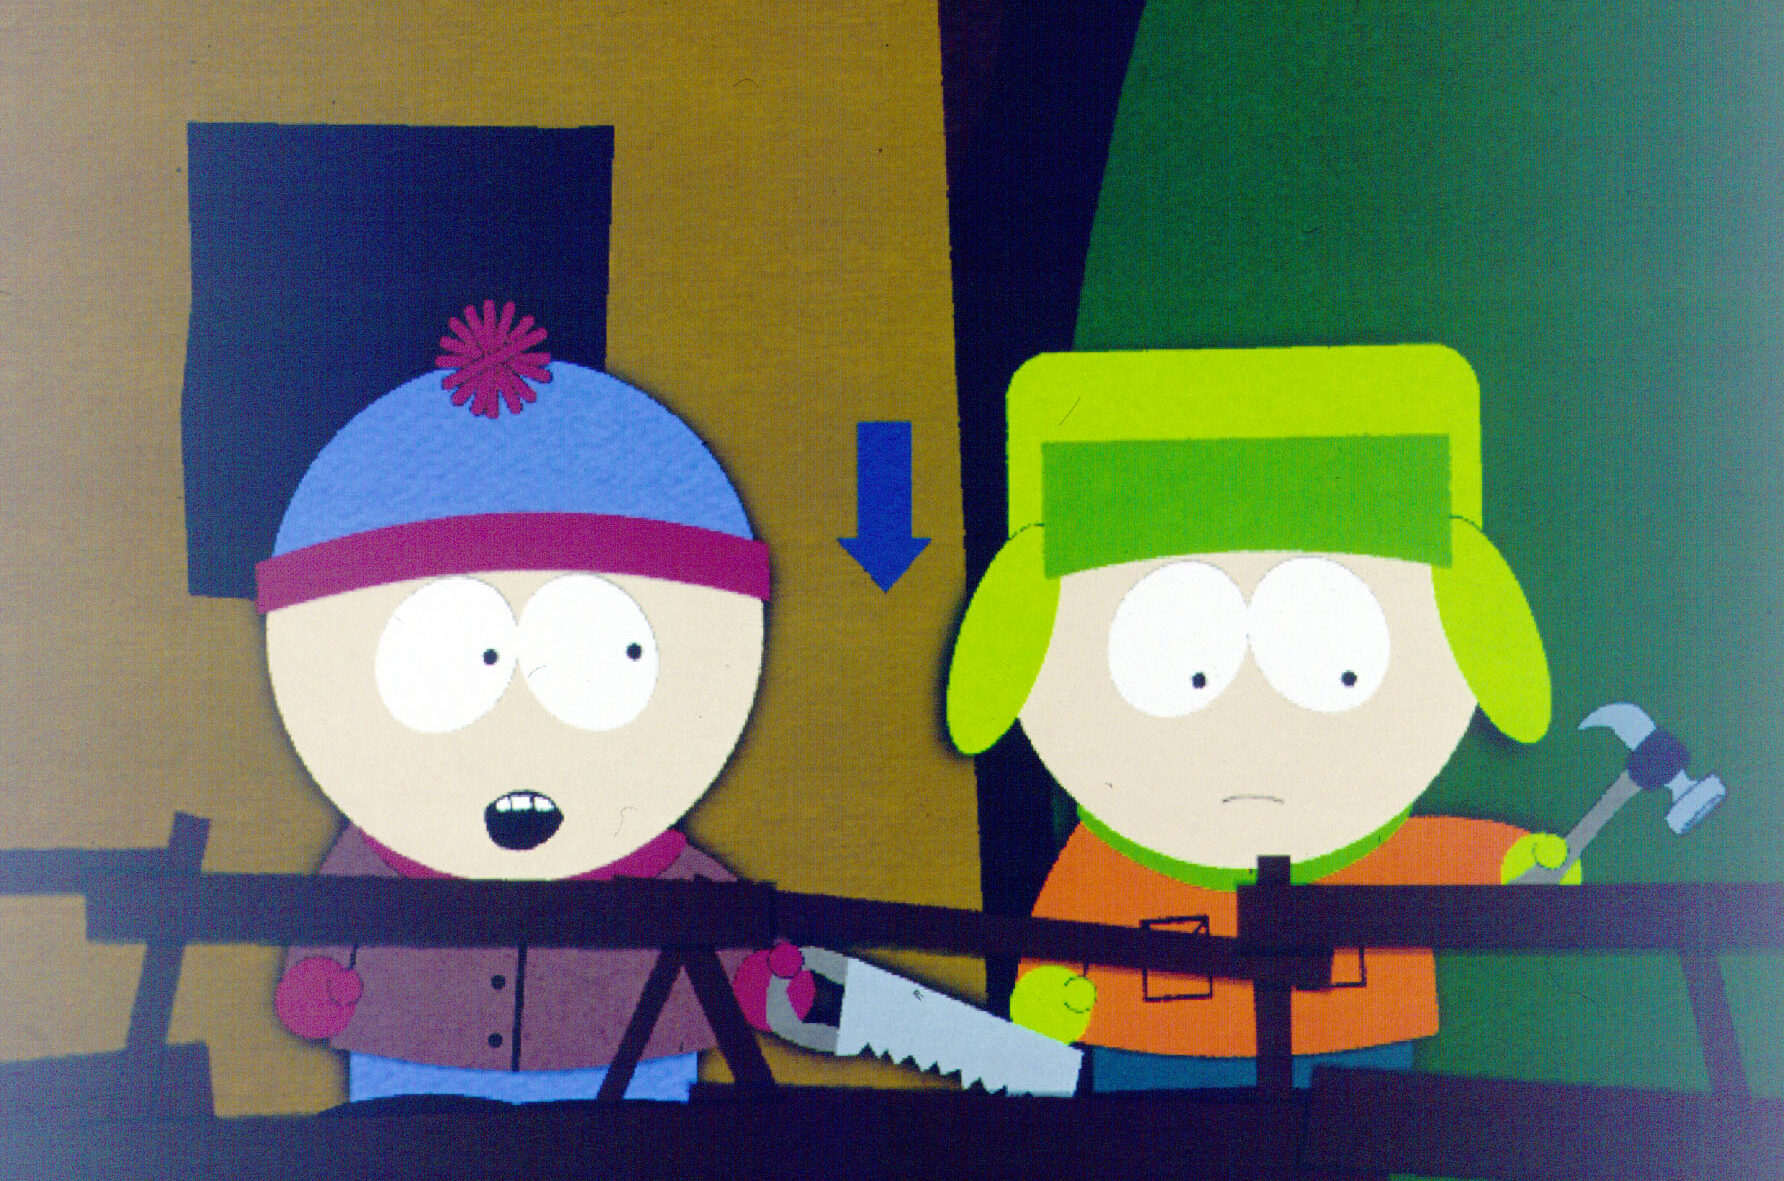 South Park Porn Anal - Welcome to South Park, Fat Ass: Our 1998 Cover Story